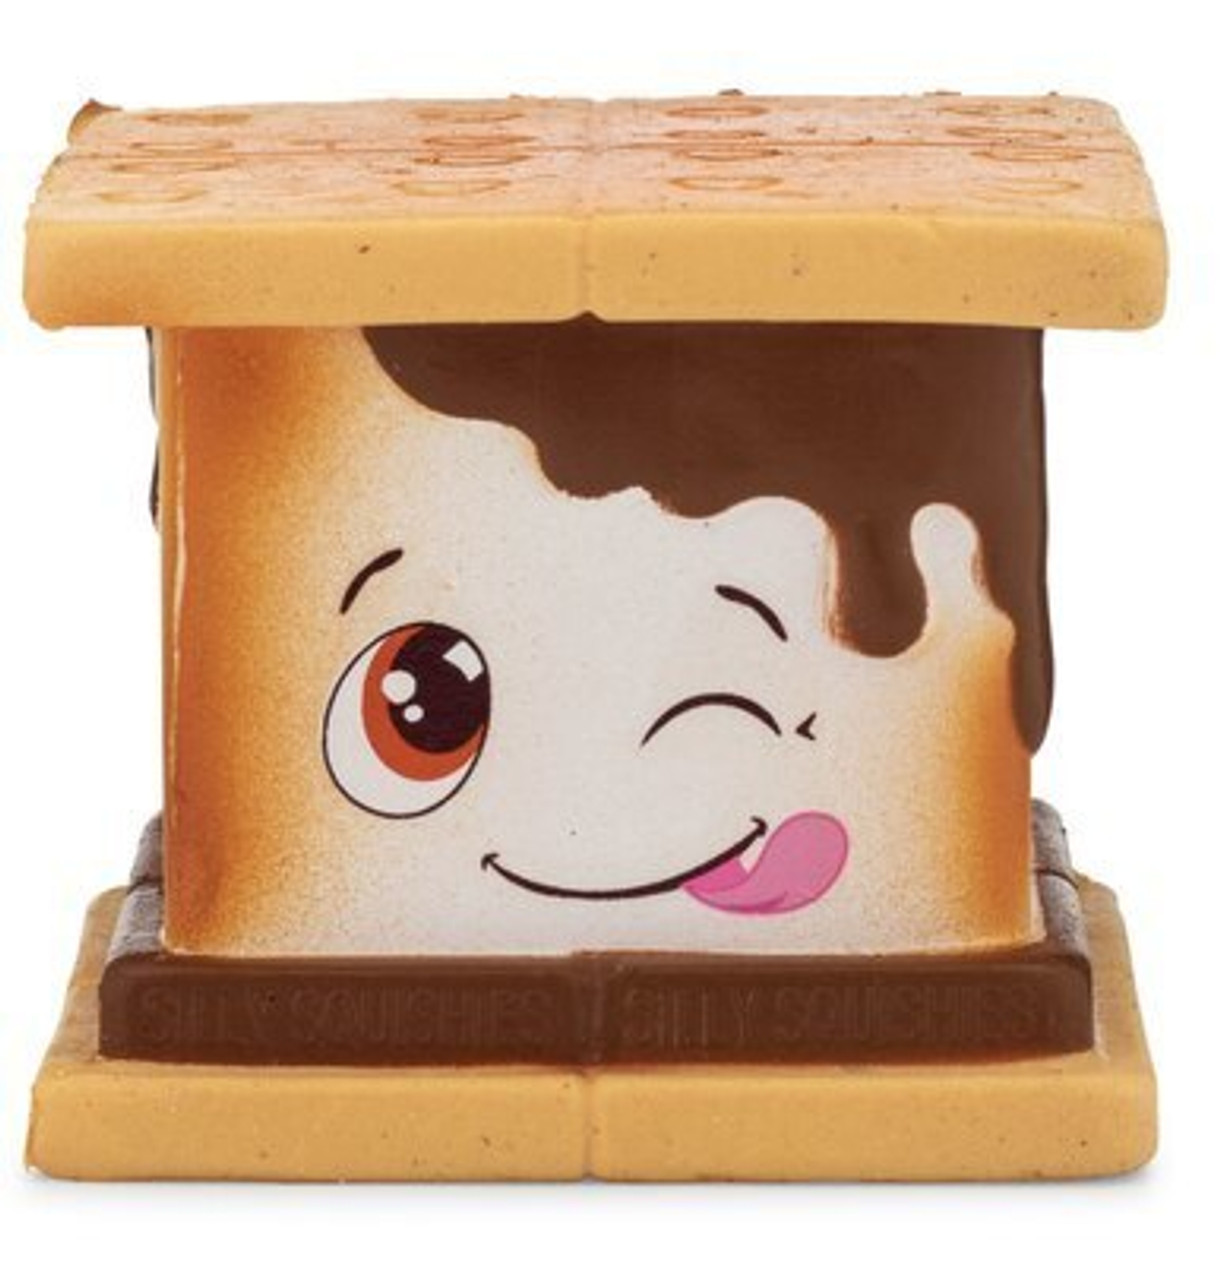 S'maury Squishy S'more Toy